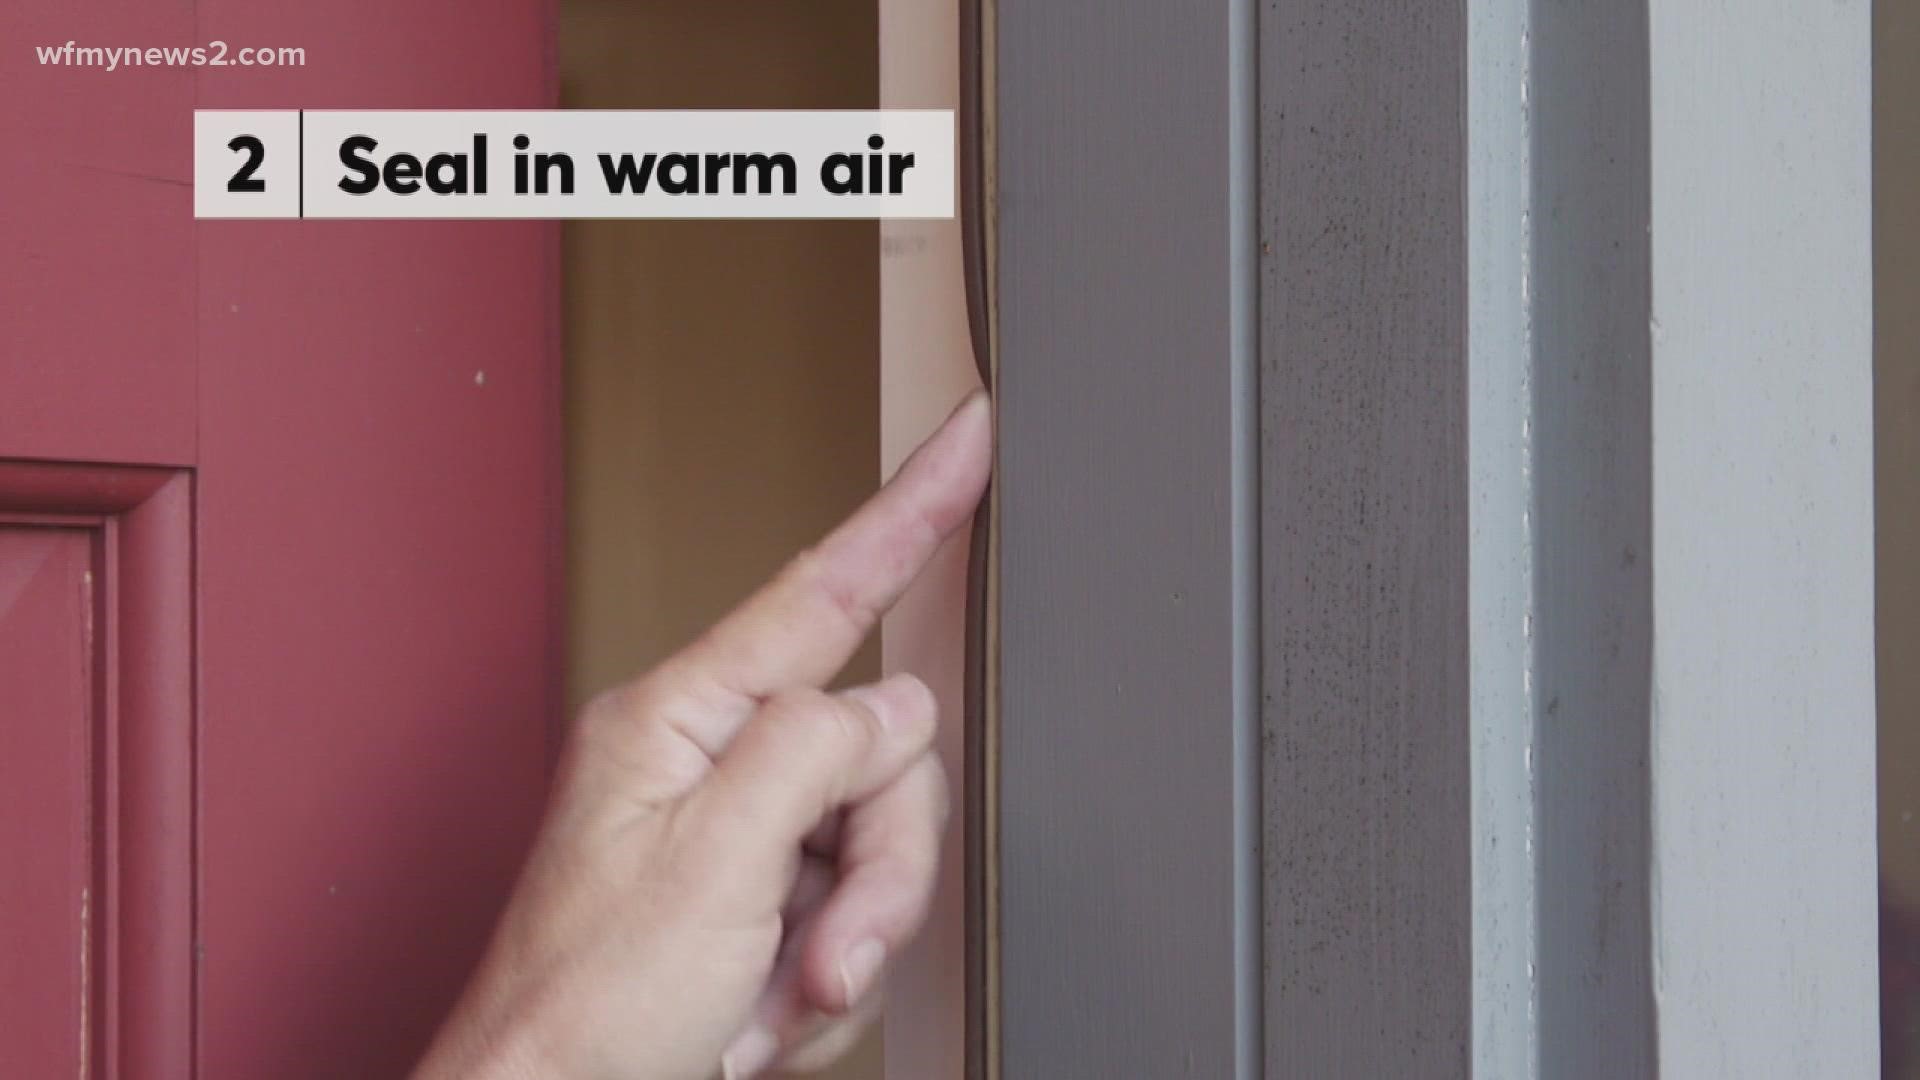 There are hacks to keep your home warm, without breaking the energy bill.